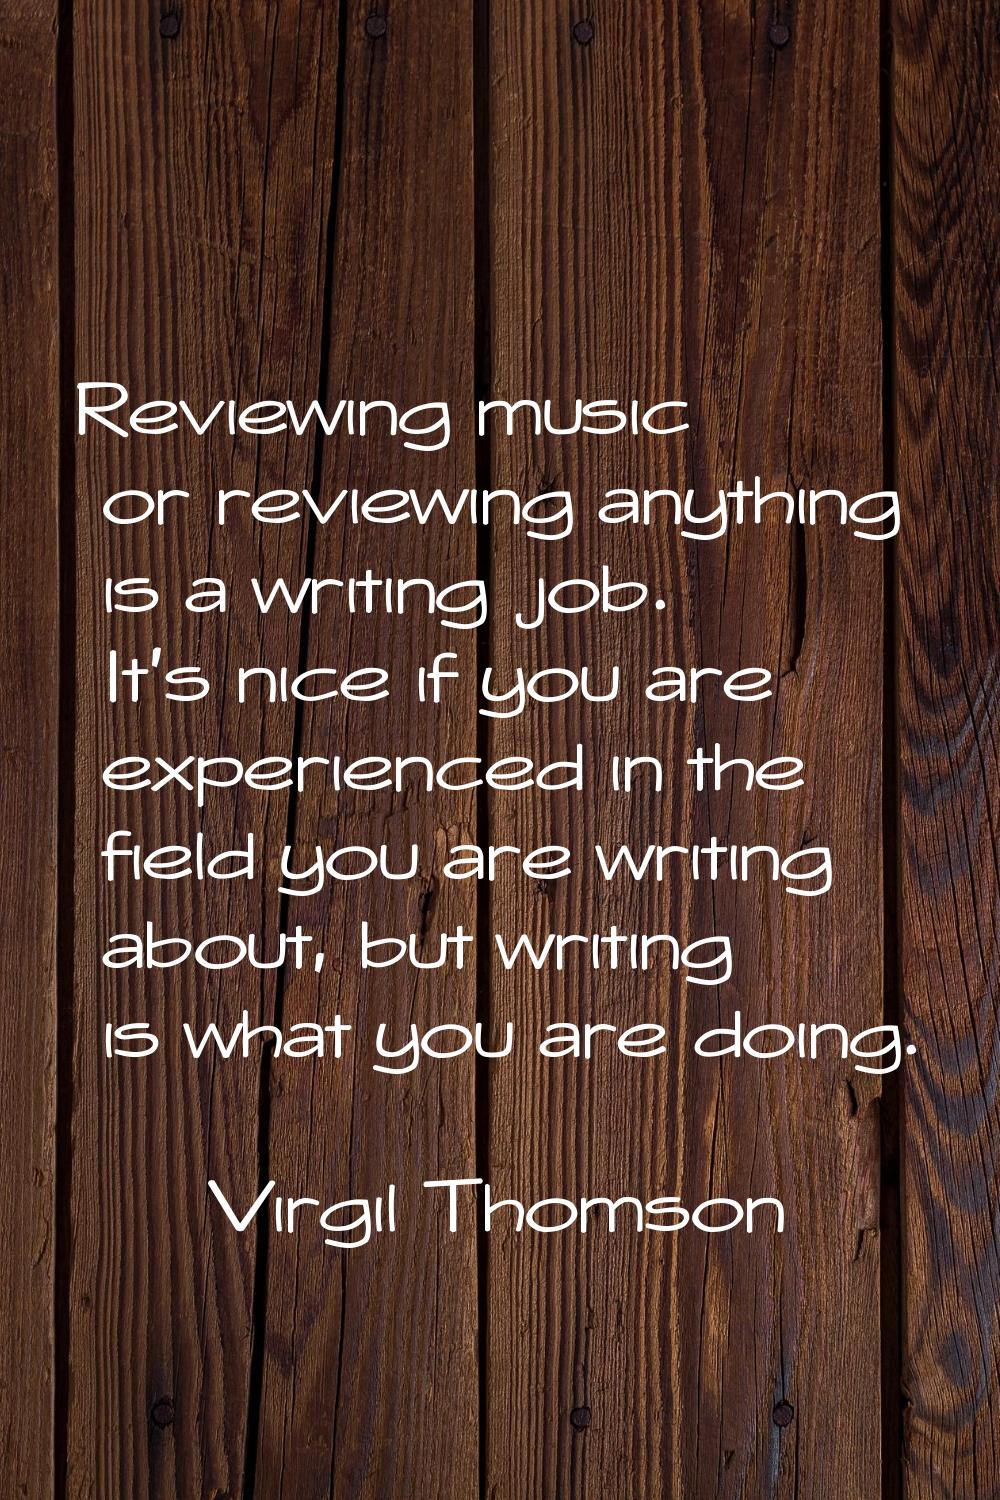 Reviewing music or reviewing anything is a writing job. It's nice if you are experienced in the fie